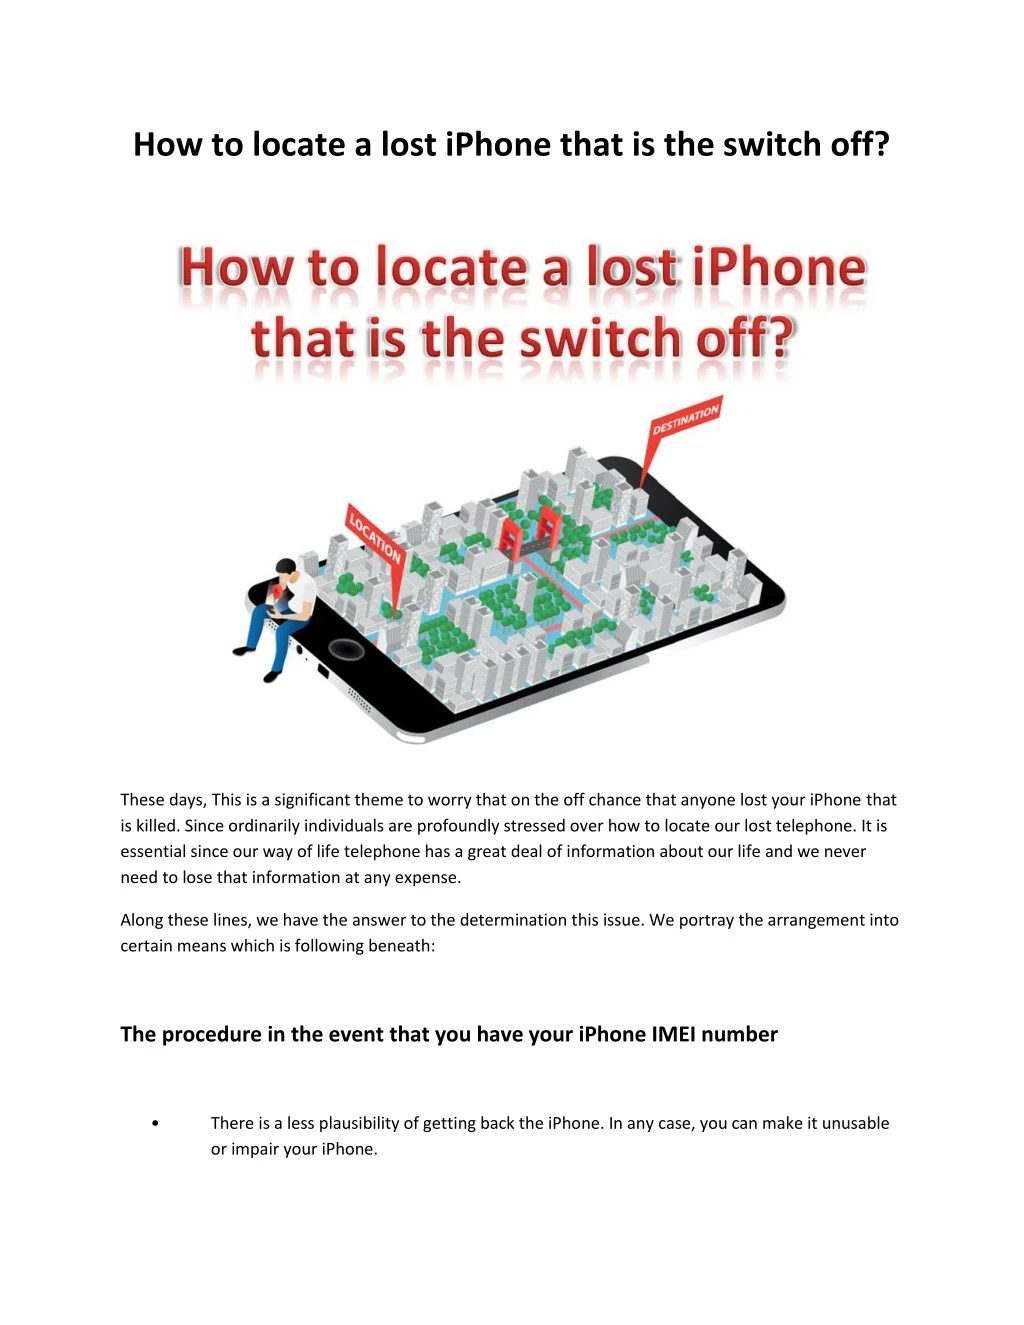 how to locate a lost iphone that is the switch off